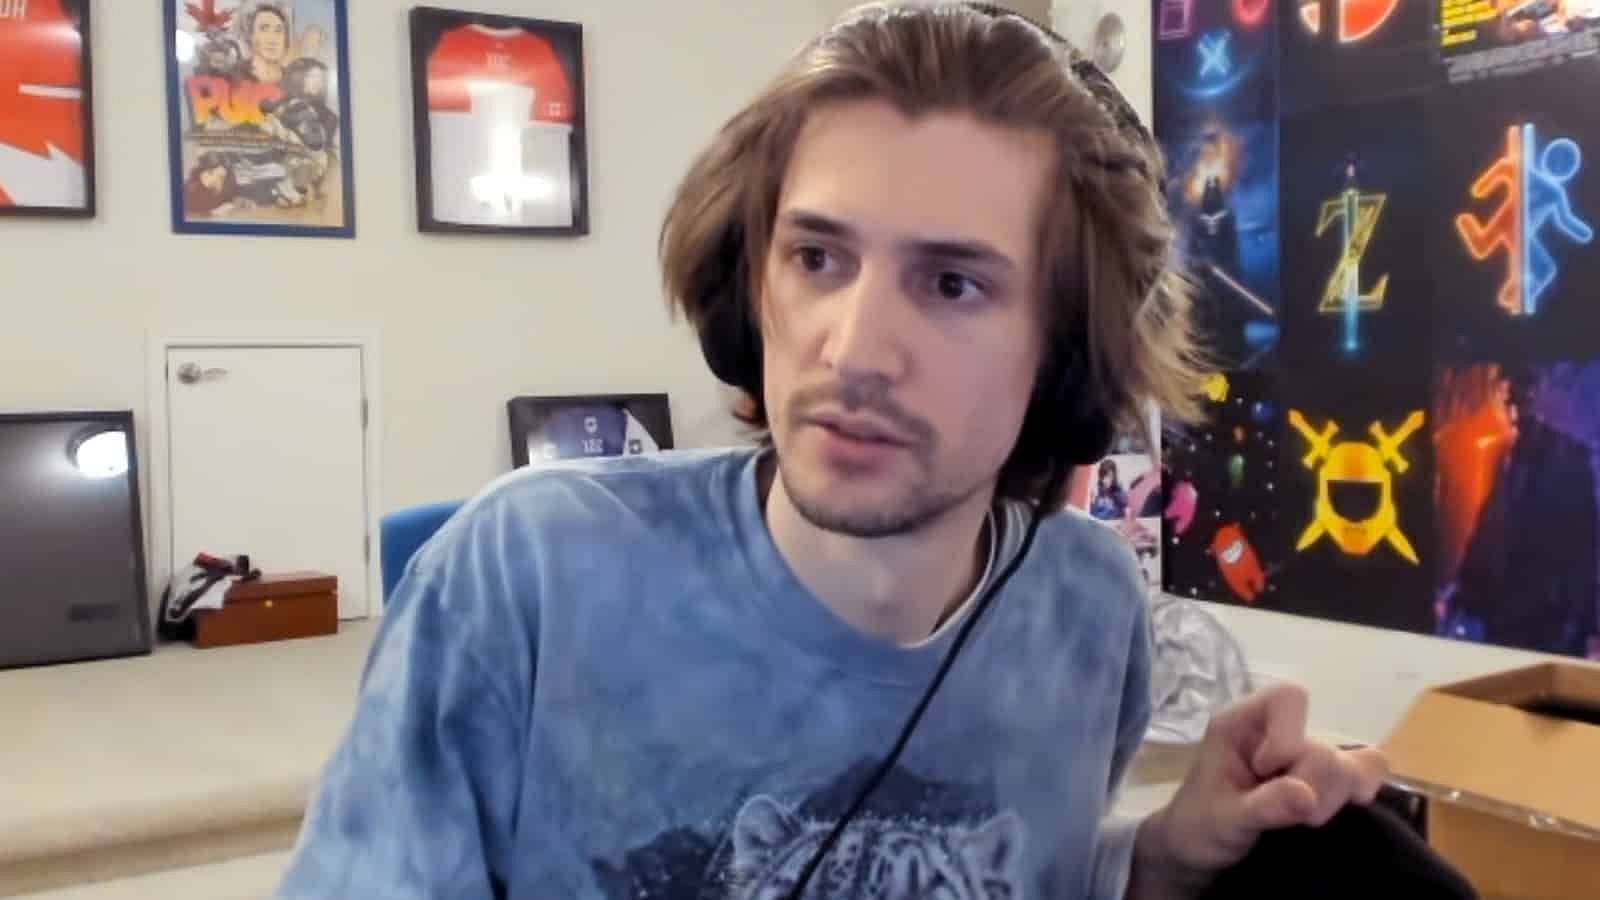 xQc got into yet another altercation during a recent GTA RP stream. (Image via xQc)